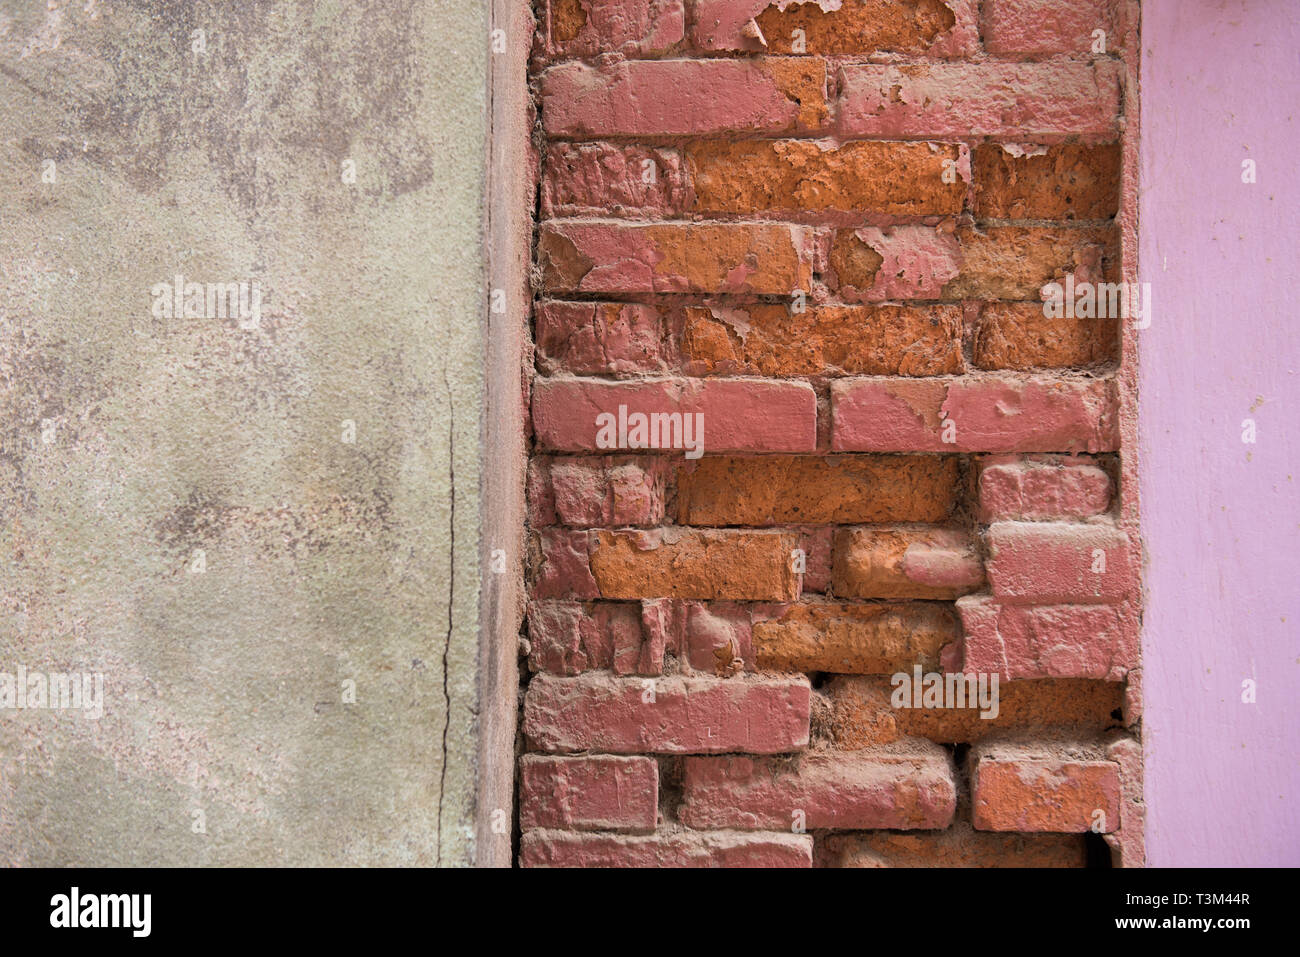 Vertical coloured bands of wall reminiscent of a Neapolitan cake. Stock Photo